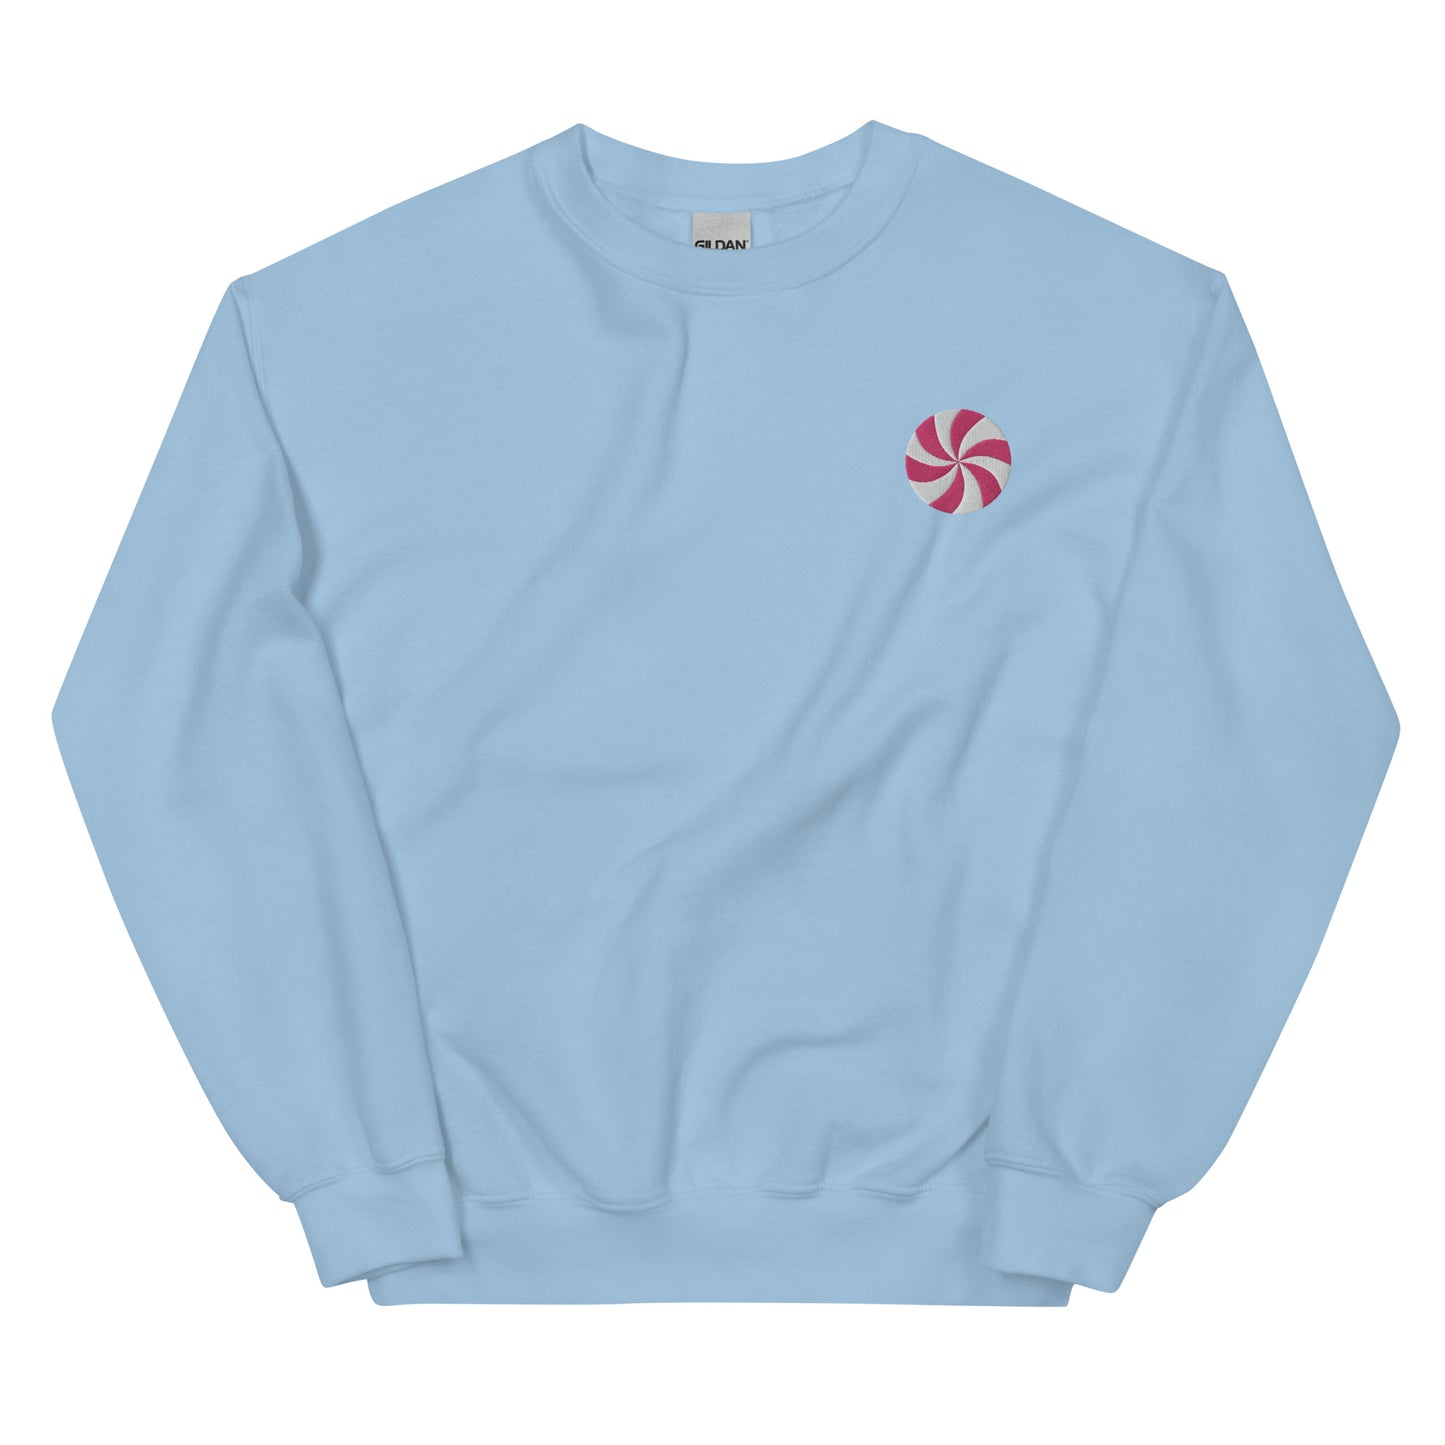 Pink Peppermint Embroidered Sweatshirt